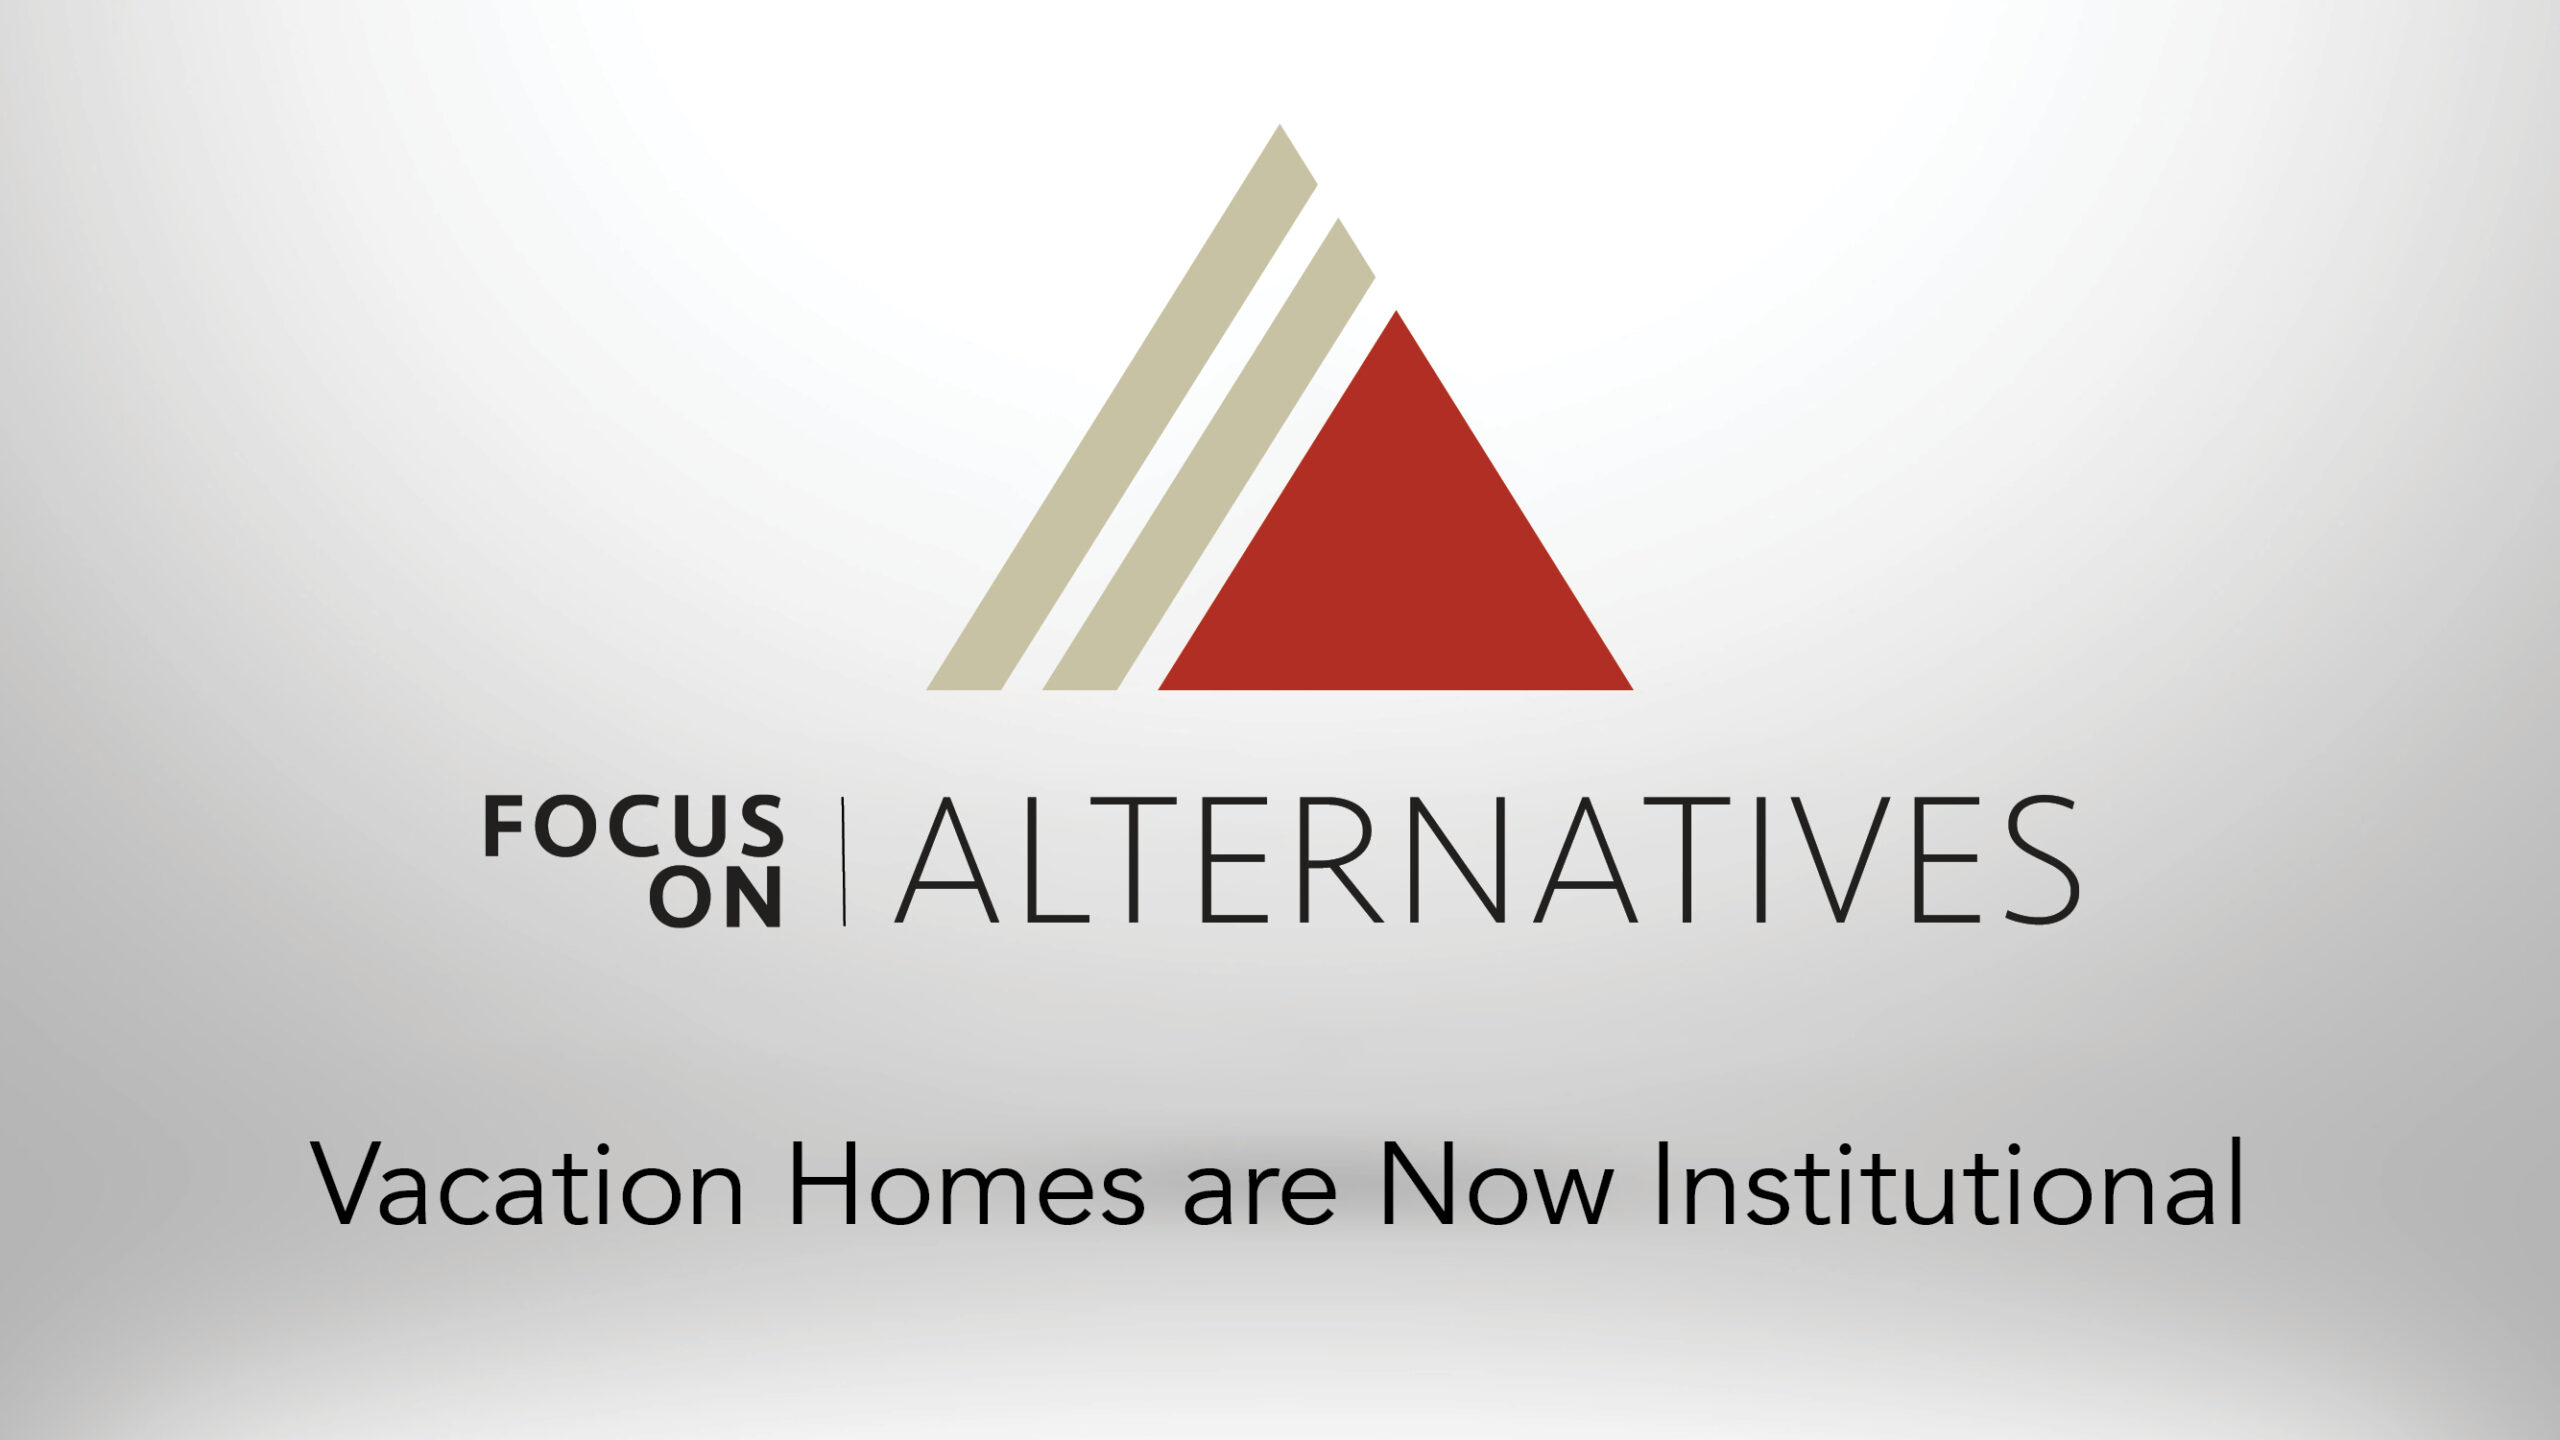 ADISA Video: Vacation Homes are Now Institutional